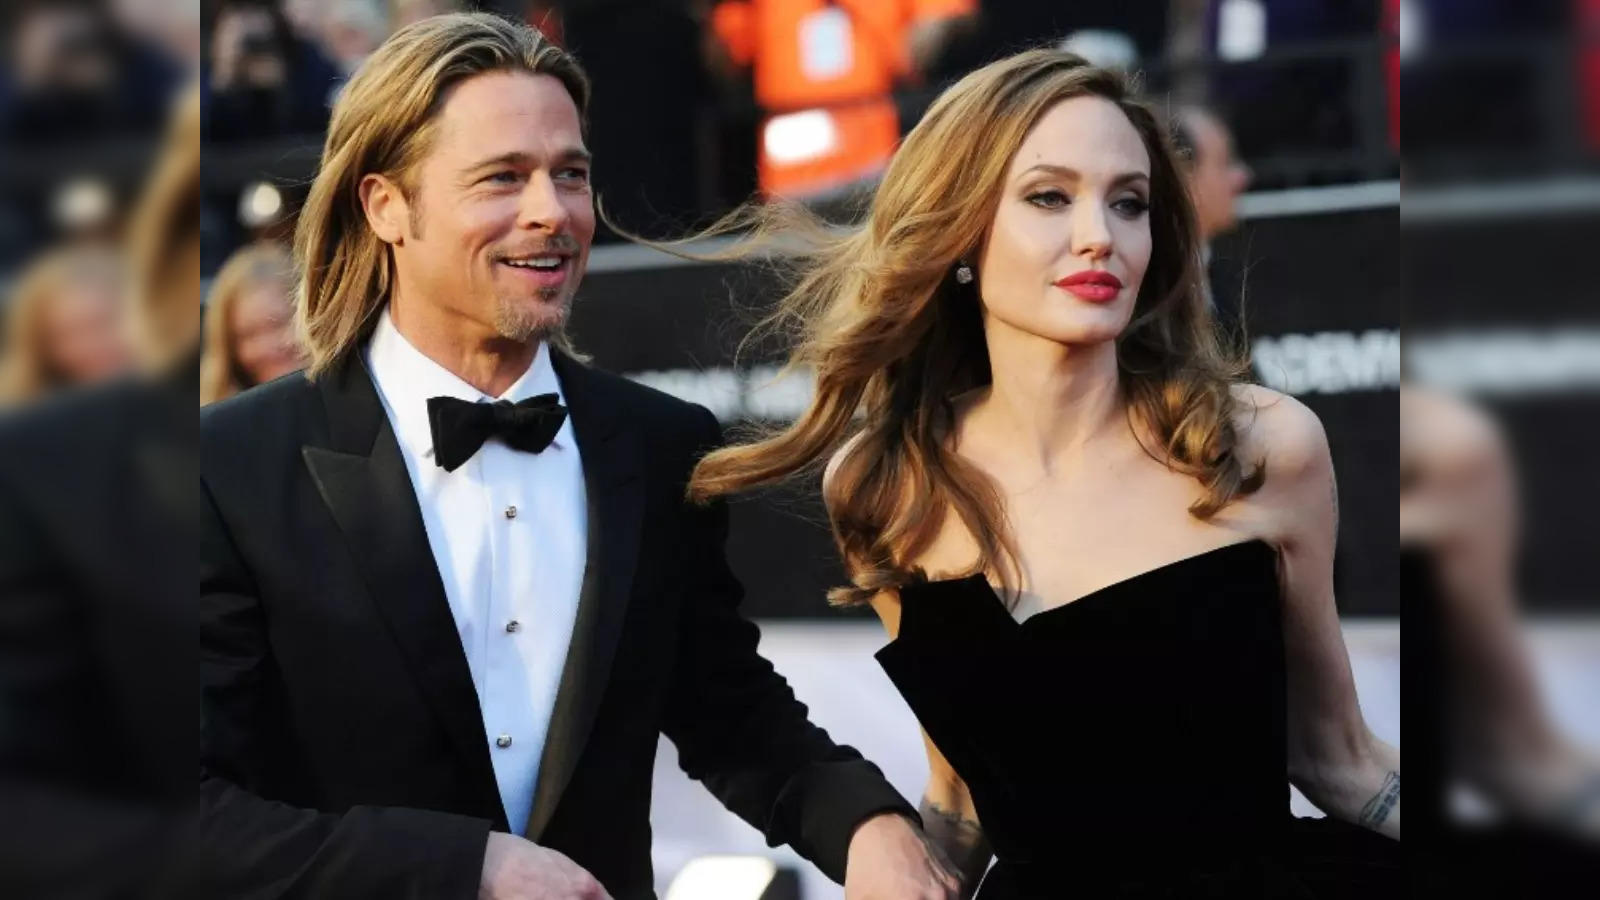 Brad Pitt and Angelina Jolie's alleged physical confrontation